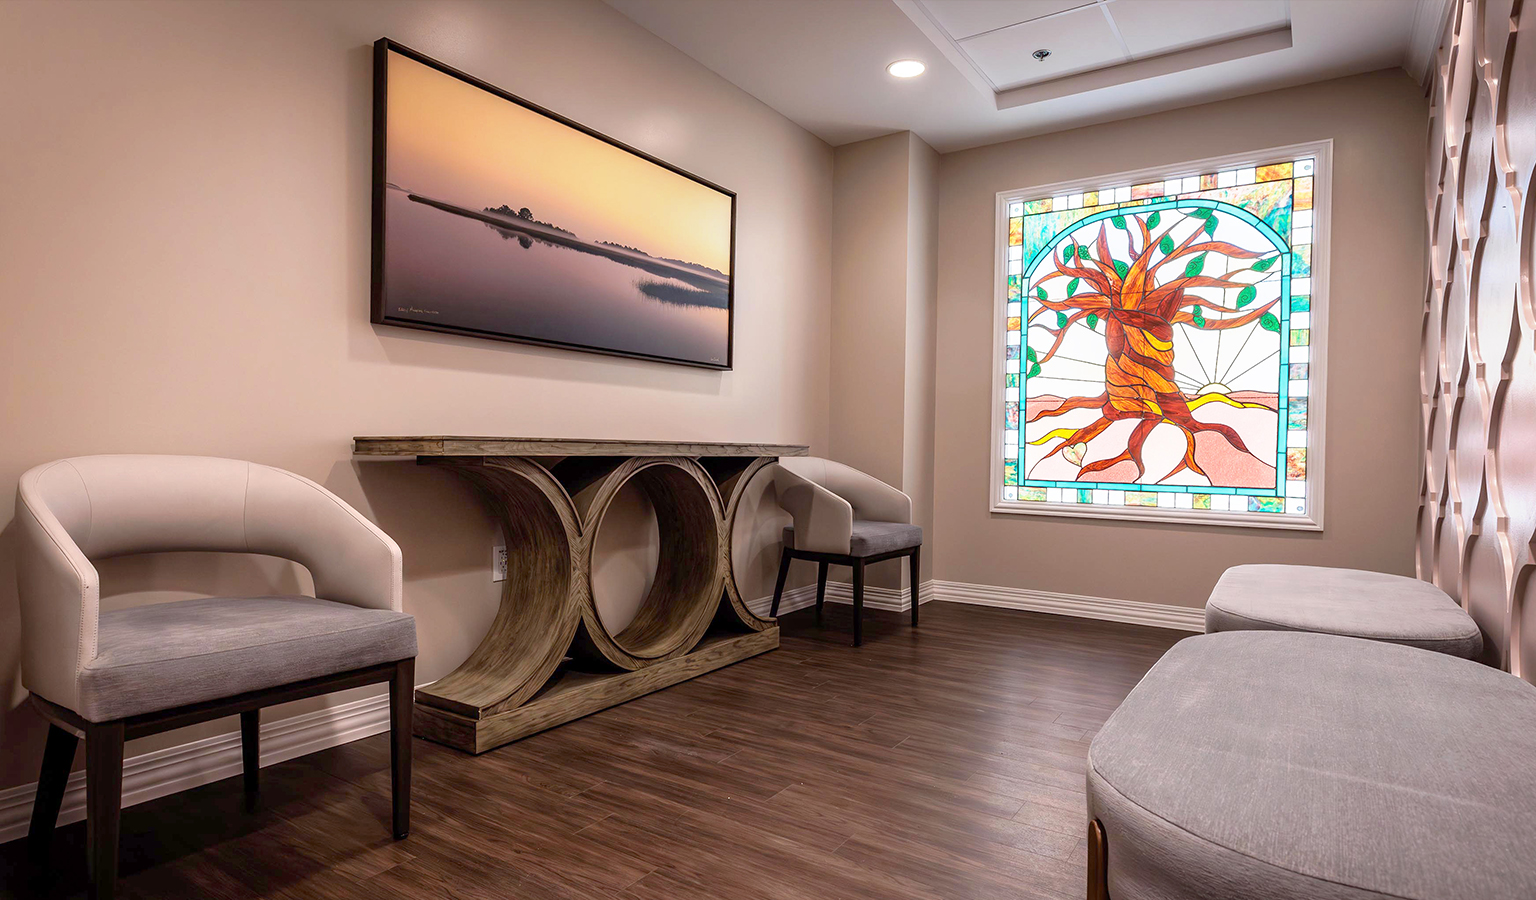 The Les and Ruth Akers Family Chapel Reflection Room at the First Commerce Center for Compassionate Care.